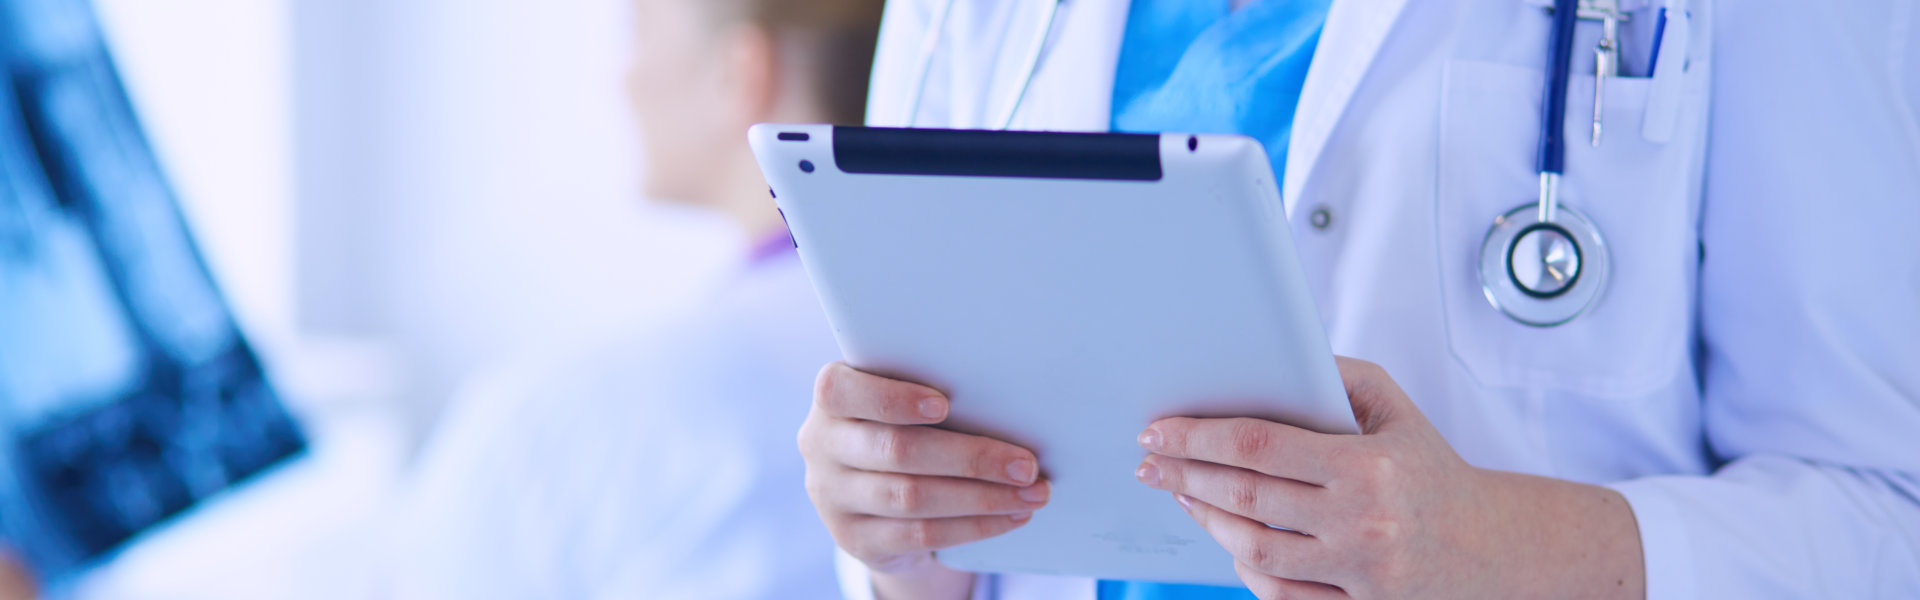 Close up shoot of doctor holding a tablet device